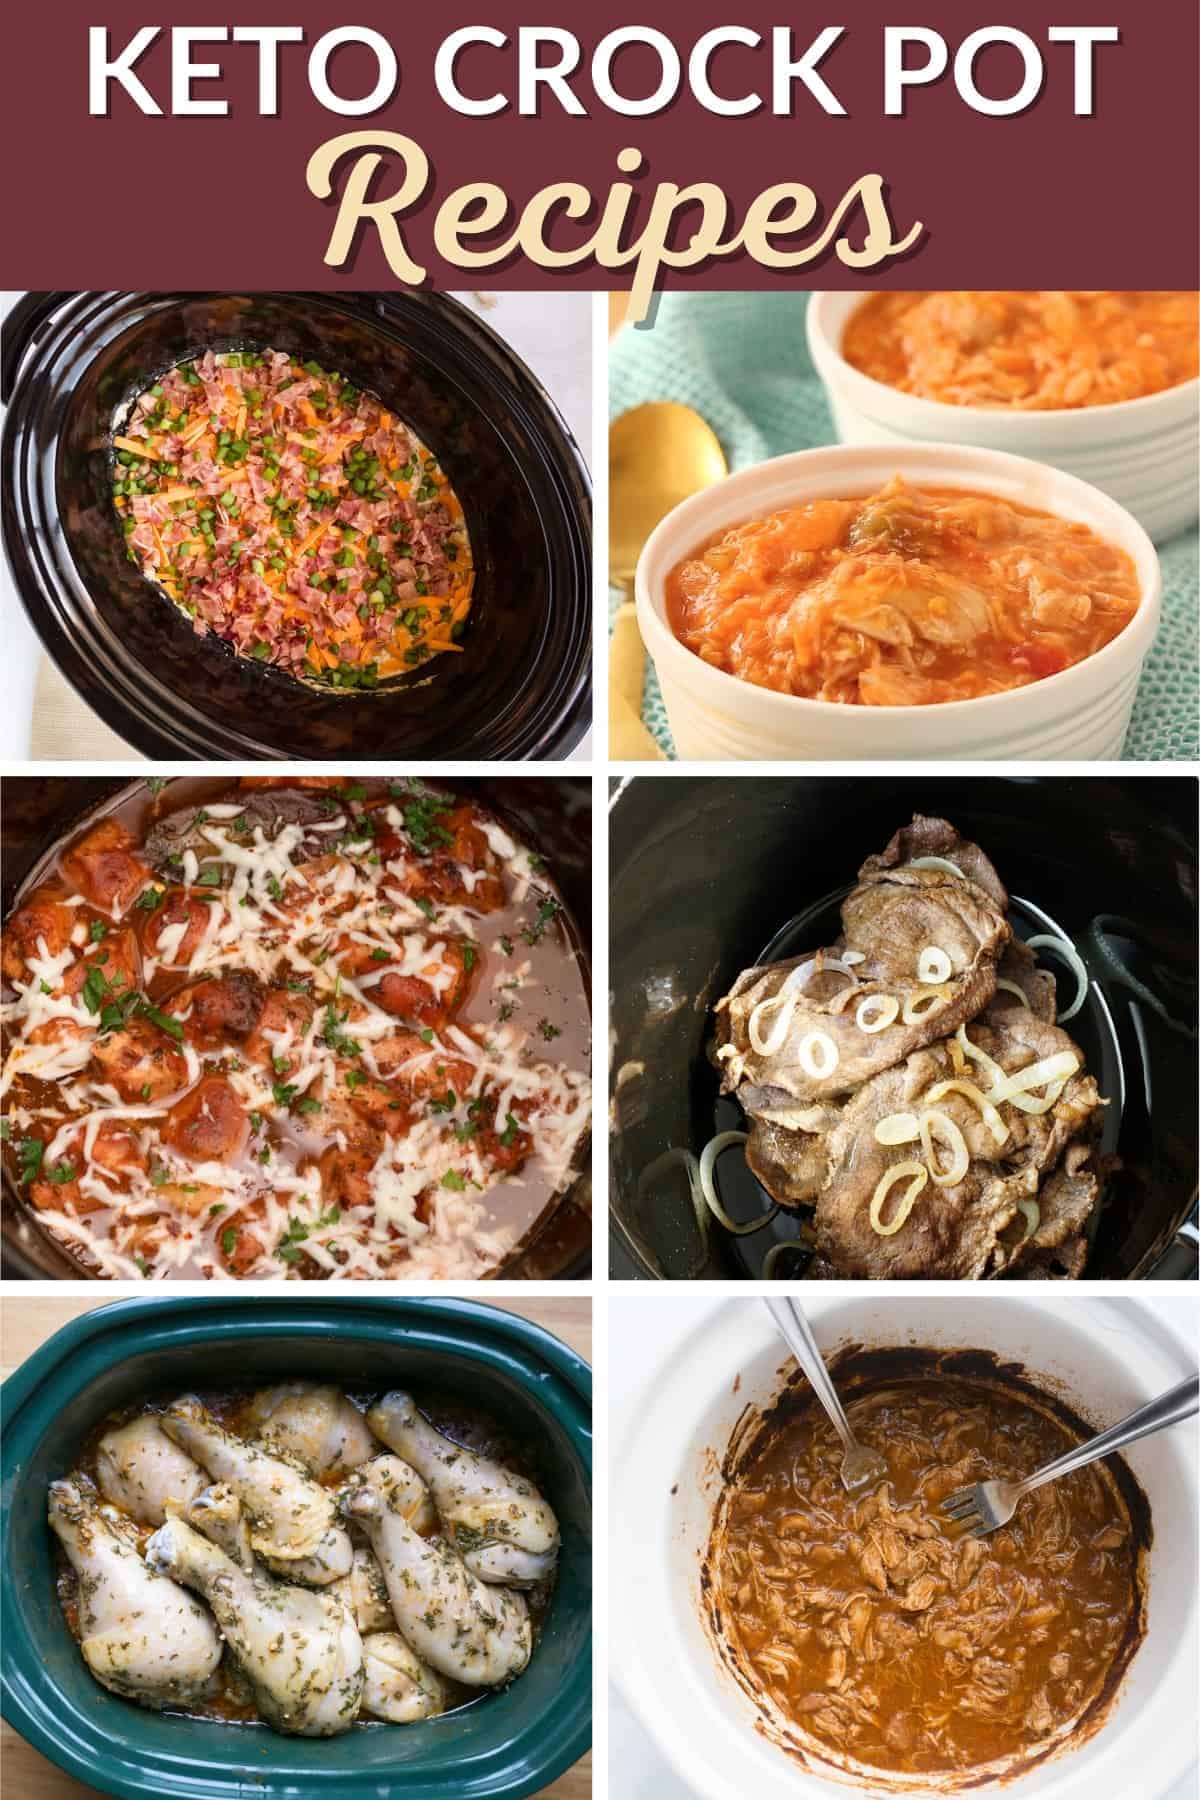 Find easy to prepare keto and low carb crock pot recipes to complete your weekly menu or to share at a party courtesy.